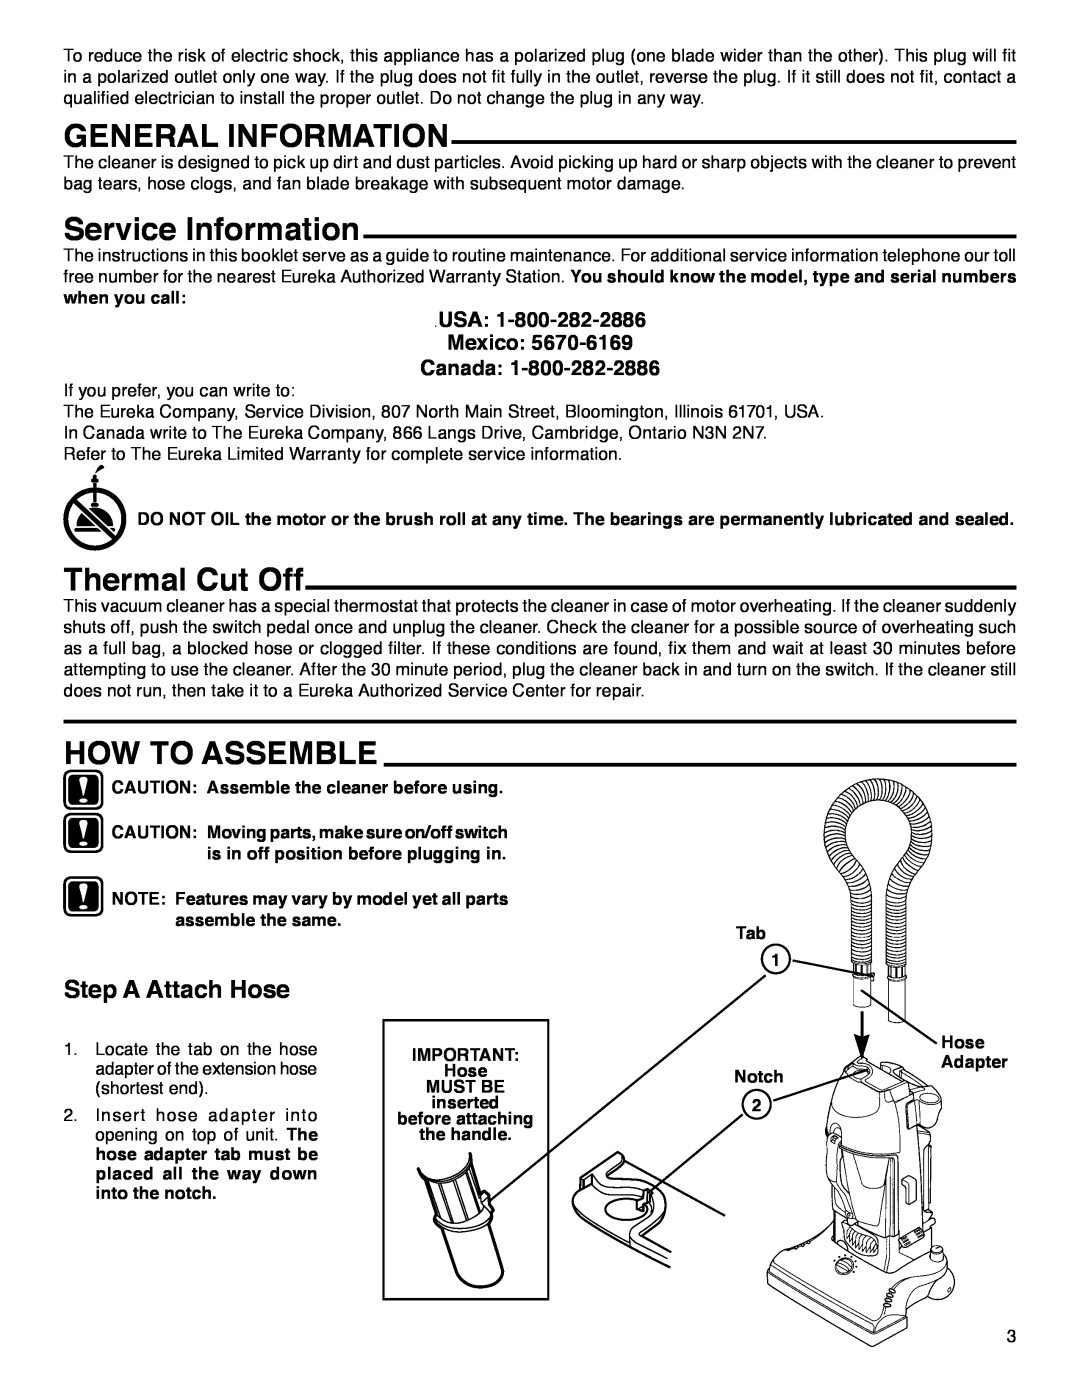 Eureka 4390 Series General Information, Service Information, Thermal Cut Off, How To Assemble, Step A Attach Hose, Notch 